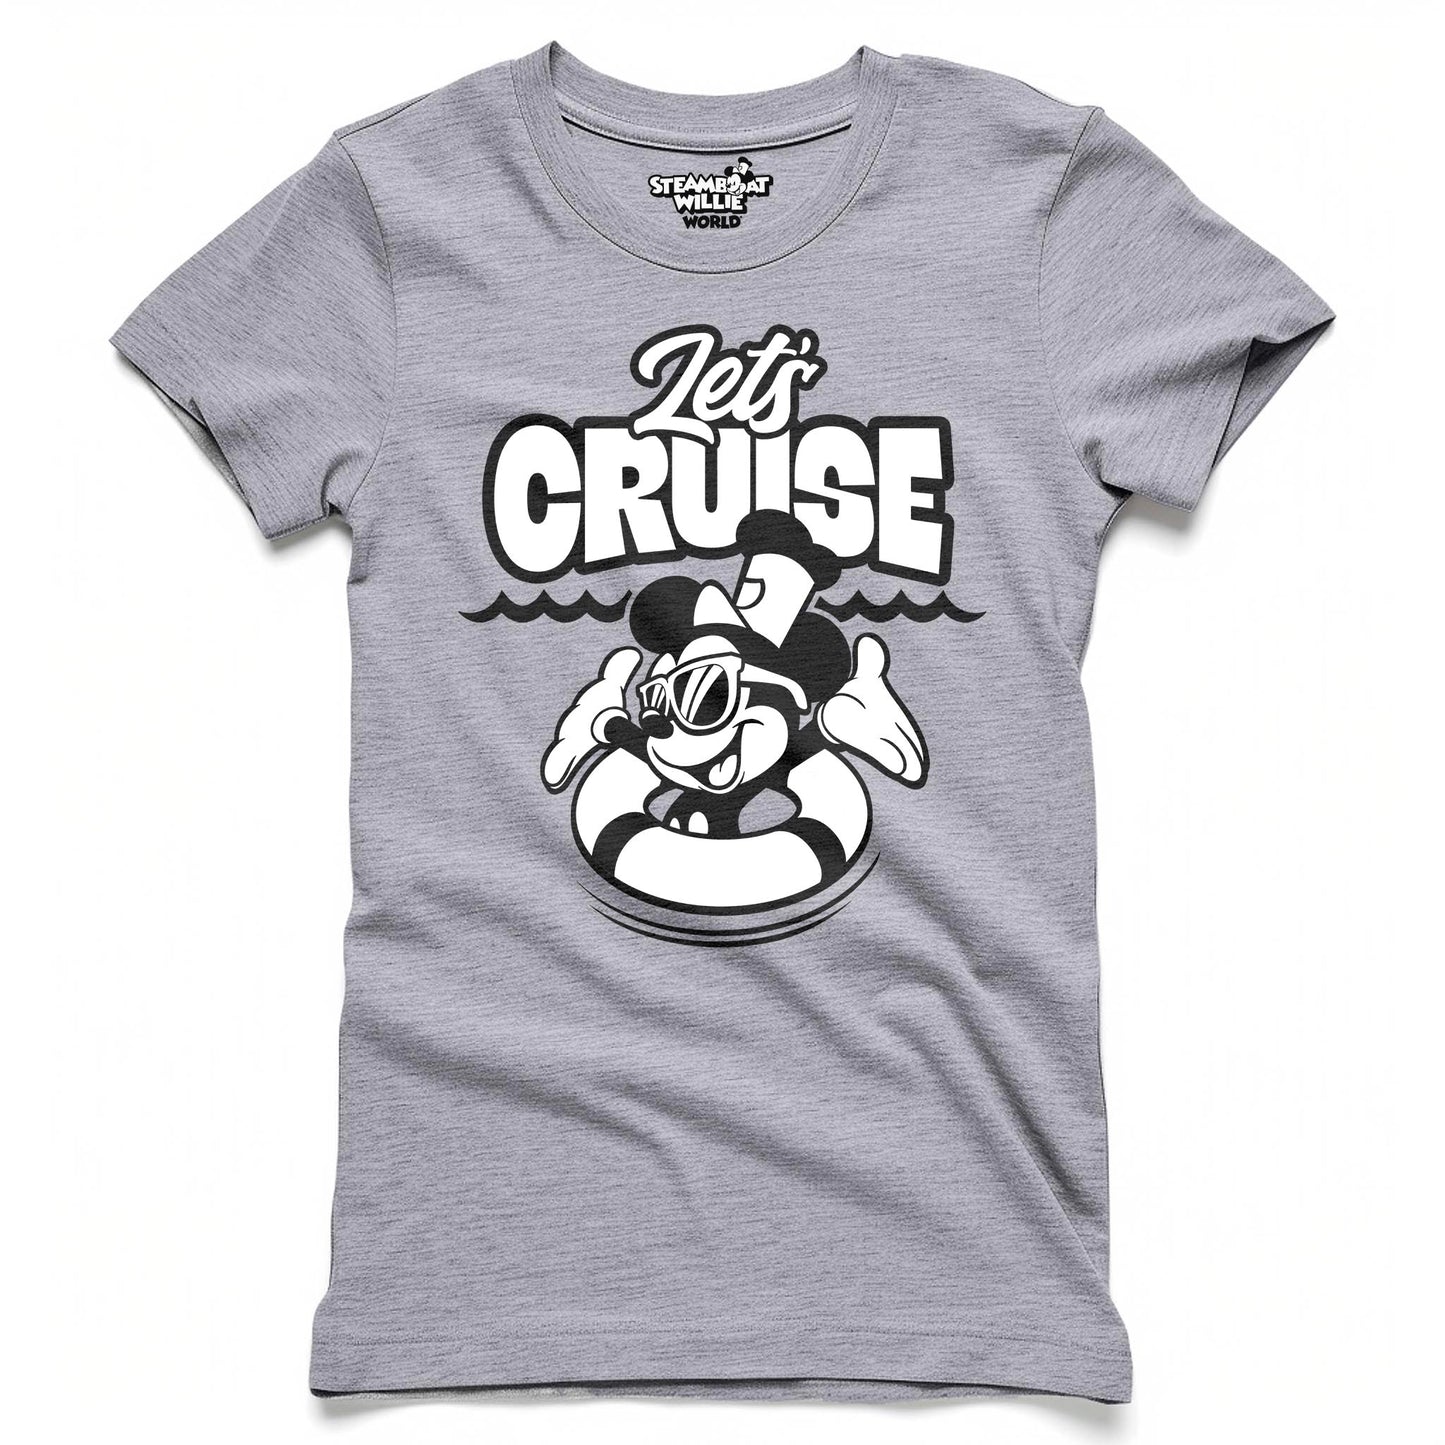 Let's Cruise! Women's Fitted Tee - Steamboat Willie World